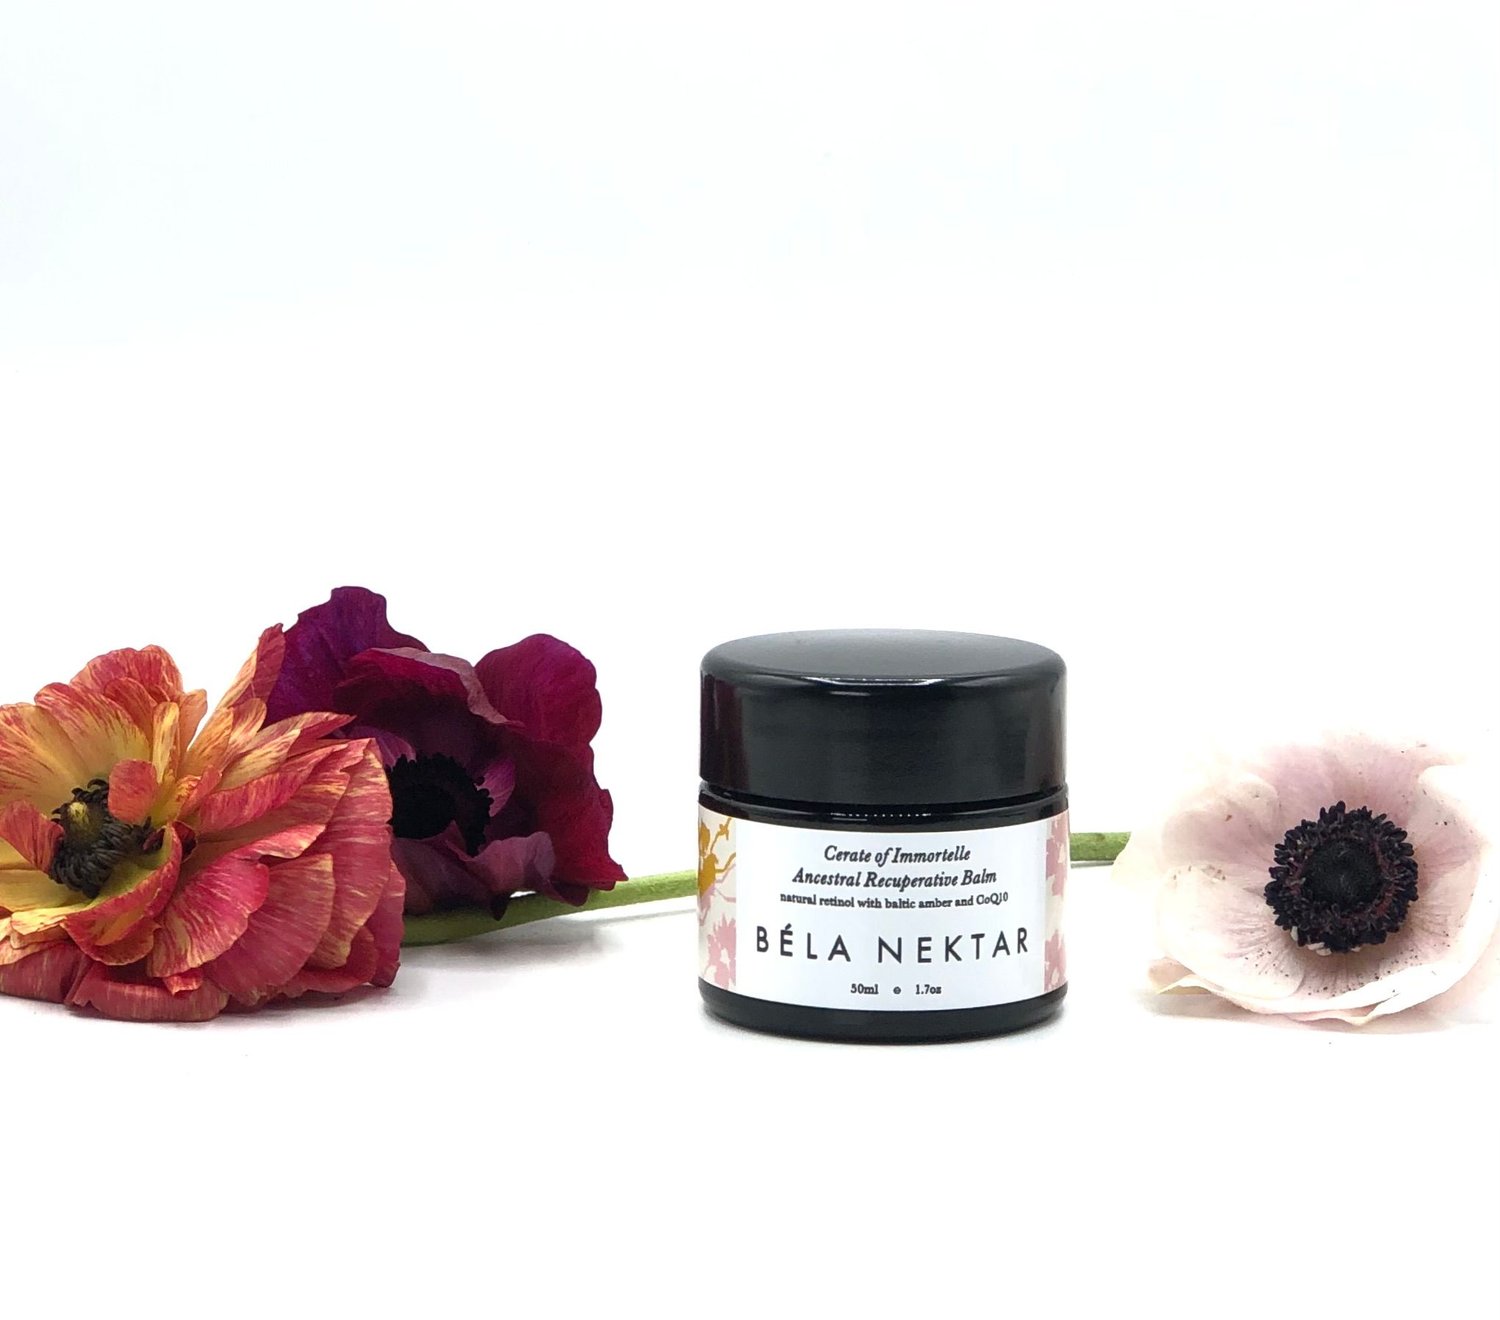 Retinol BÉLA Recuperative — Immortelle CoQ10 with Baltic and of Natural Amber Cerate Ancestral NEKTAR Balm: